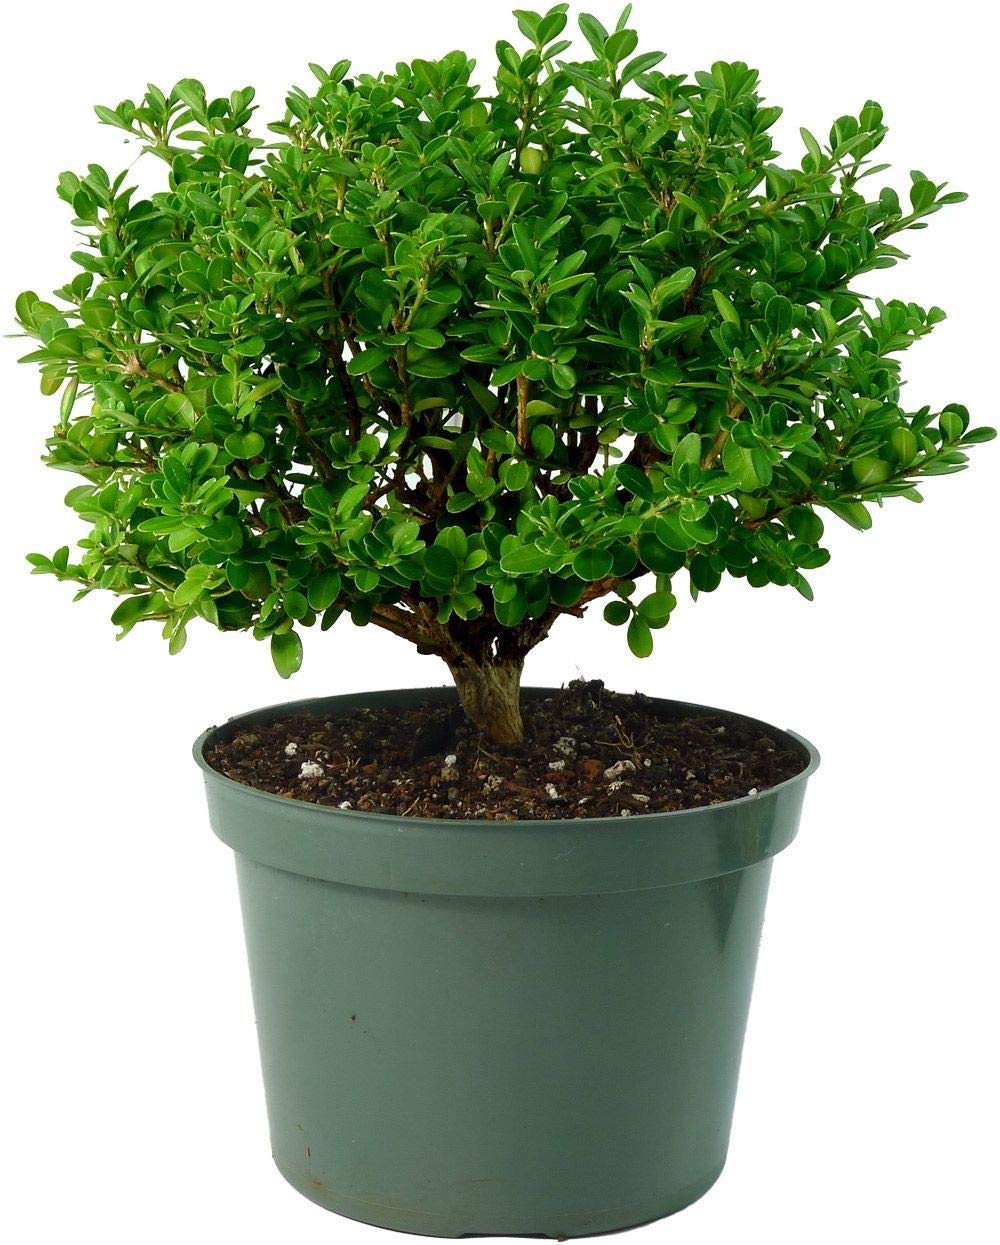 Japanese Boxwood (Buxus microphylla japonica) boxwood bonsai suitable tree (Live Plant) with pot